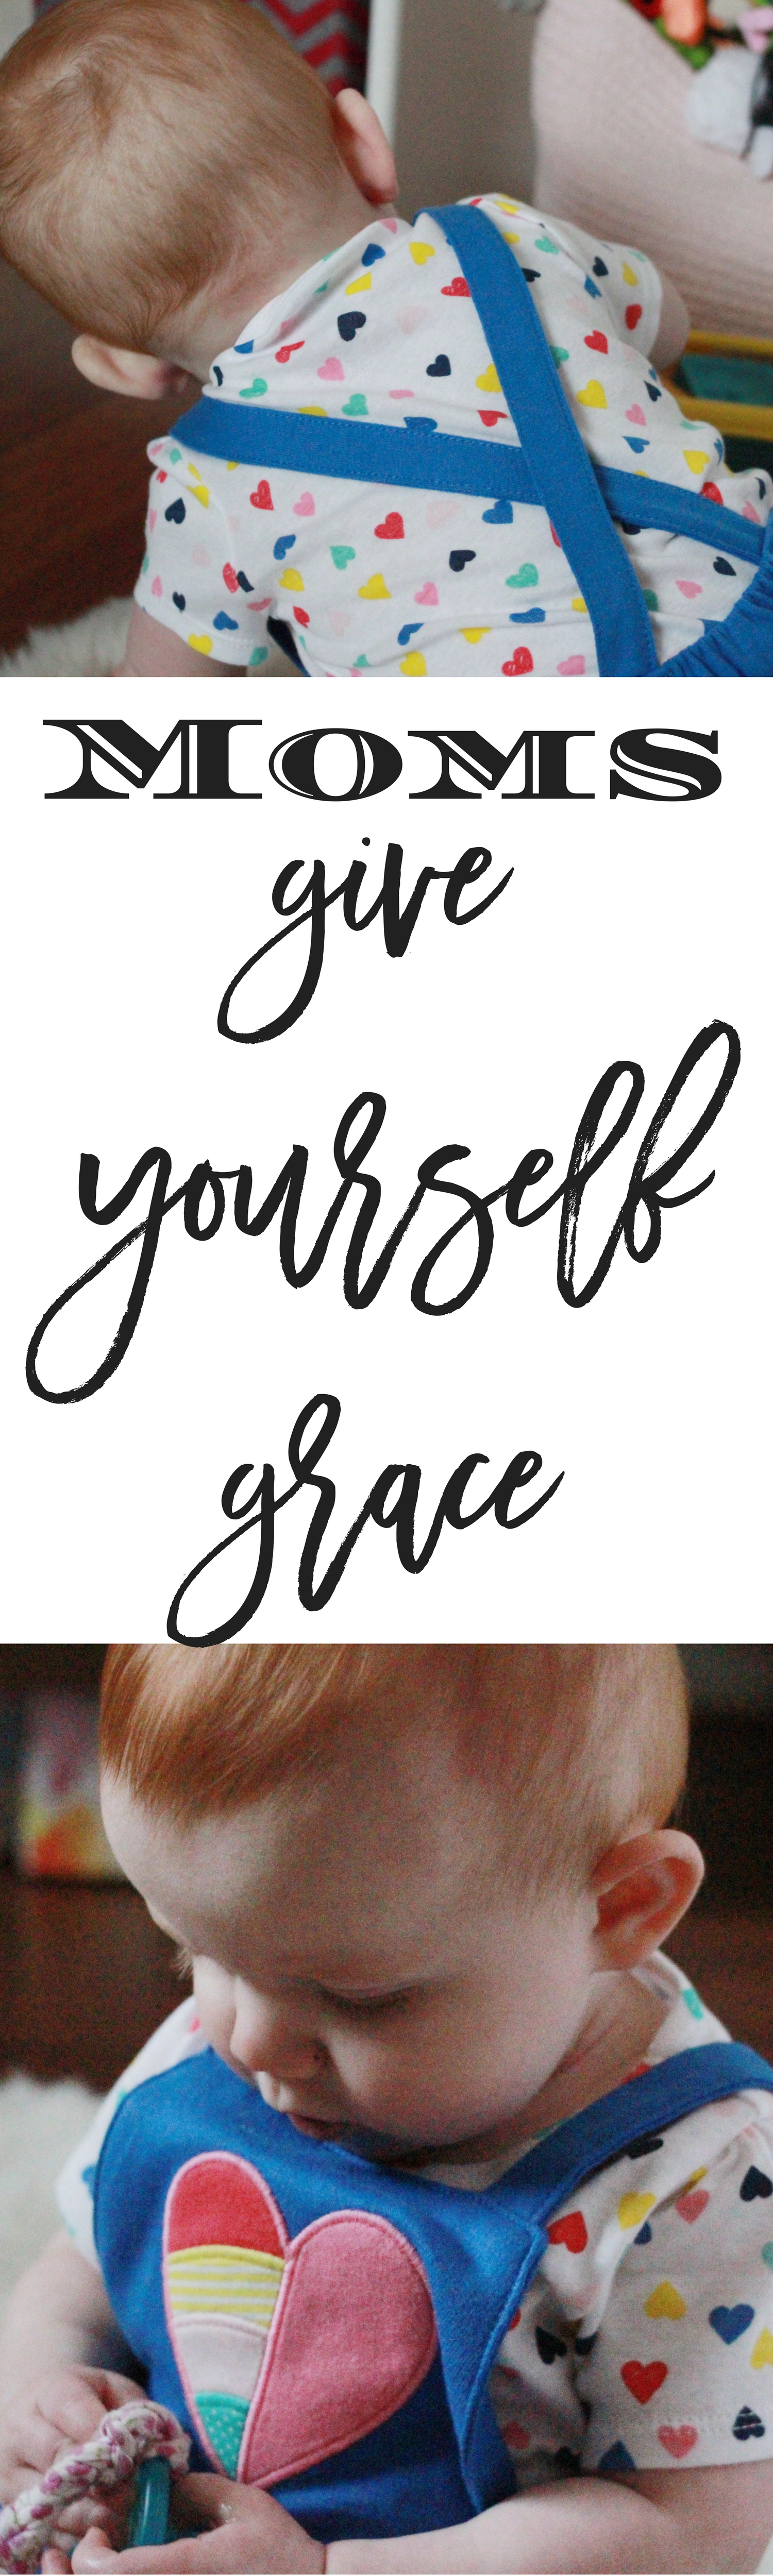 Moms give yourself grace